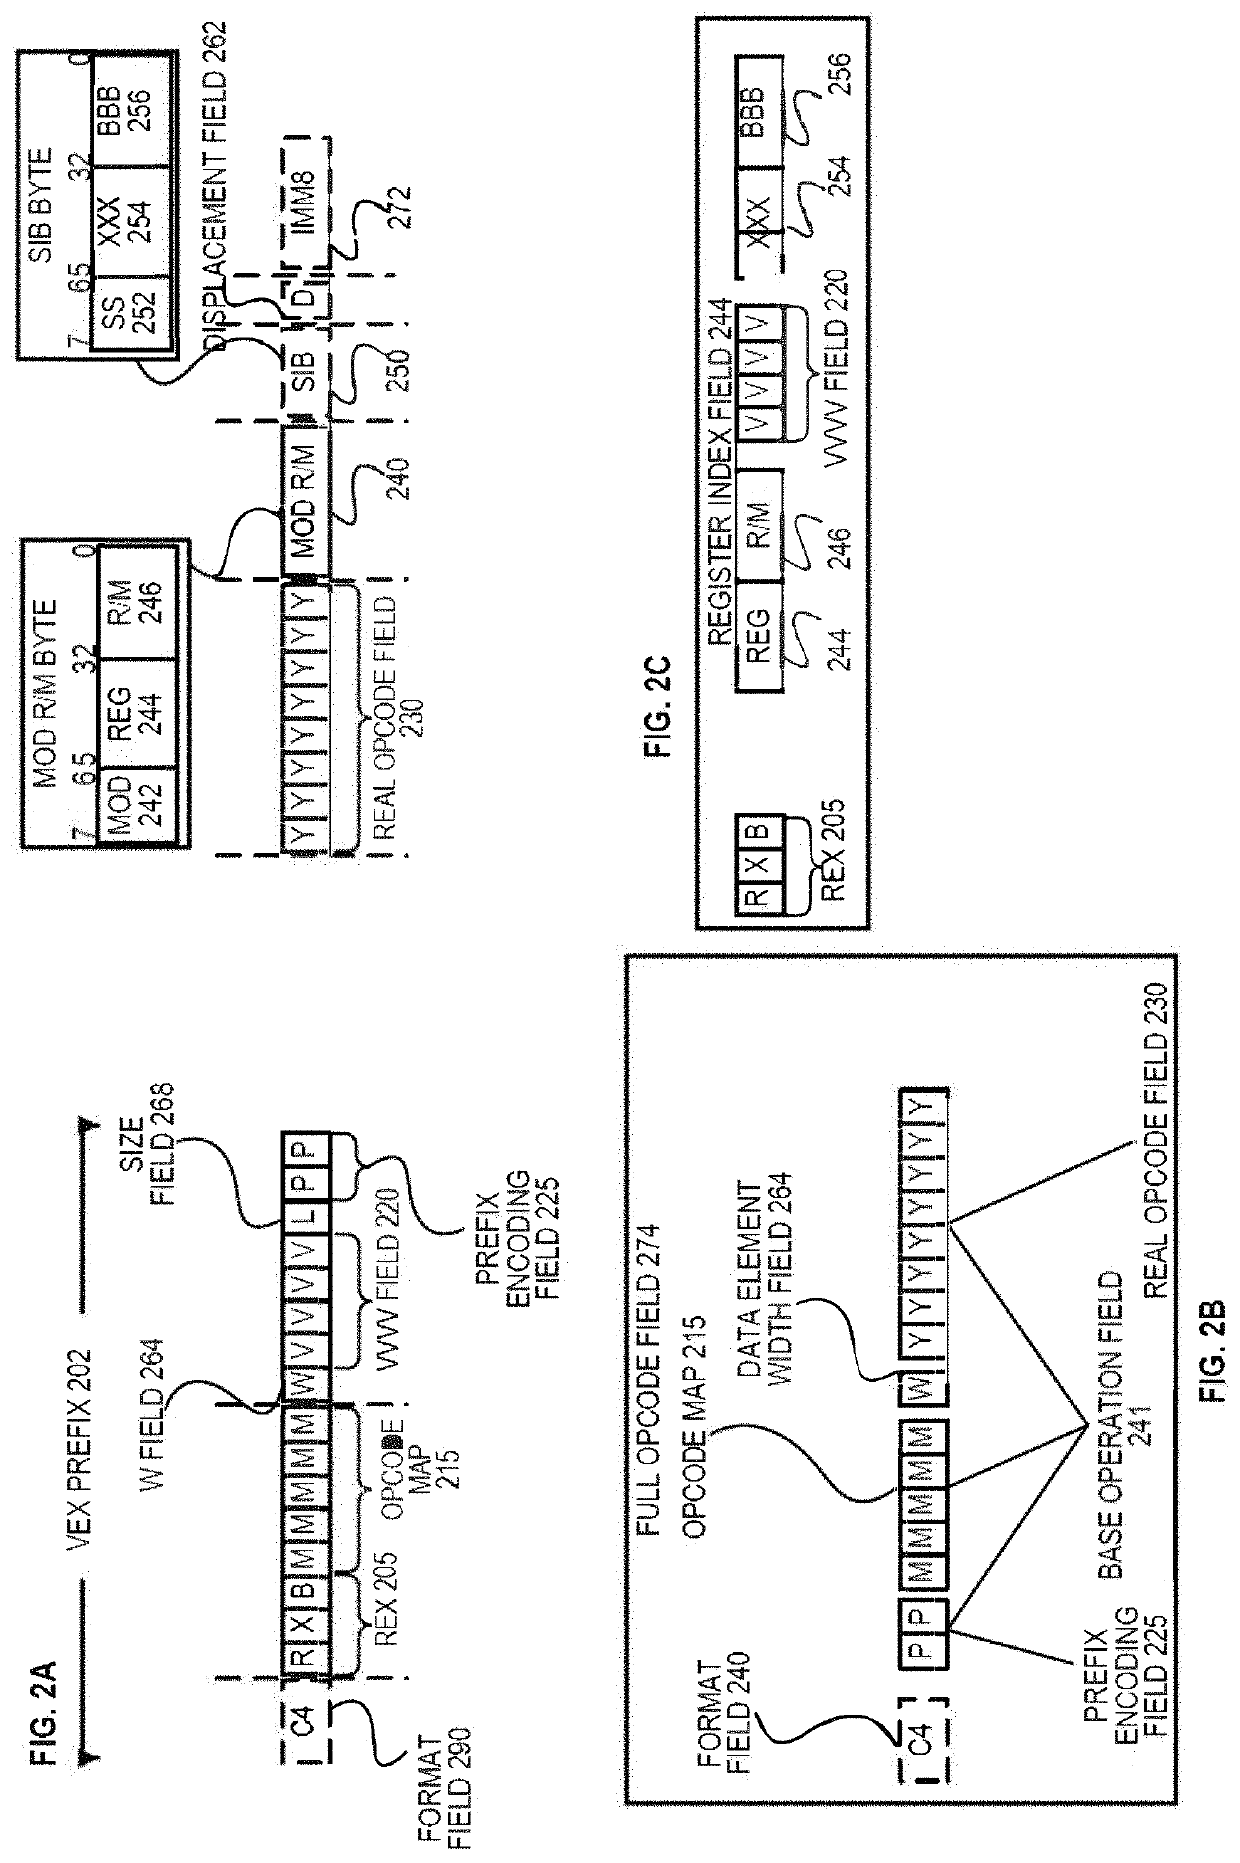 Apparatus and method to identify the source of an interrupt